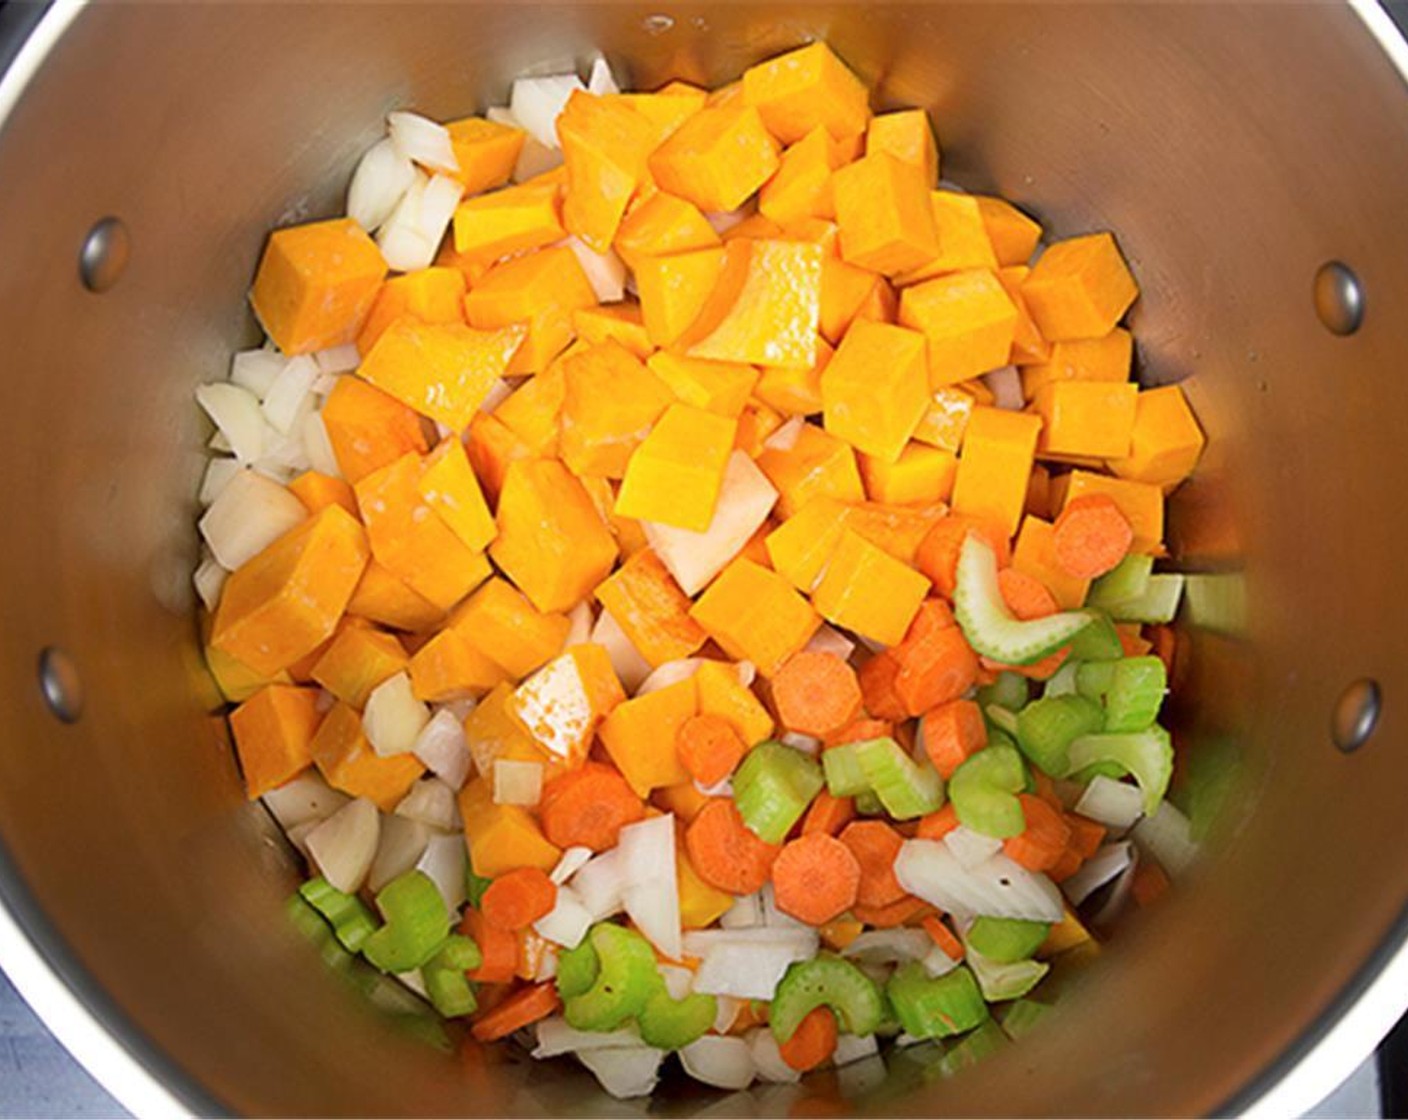 step 2 Cook the Onion (1), Celery (1 stalk), Carrot (1), Squash (1) and Potatoes (2) for 5 minutes, or until lightly browned.